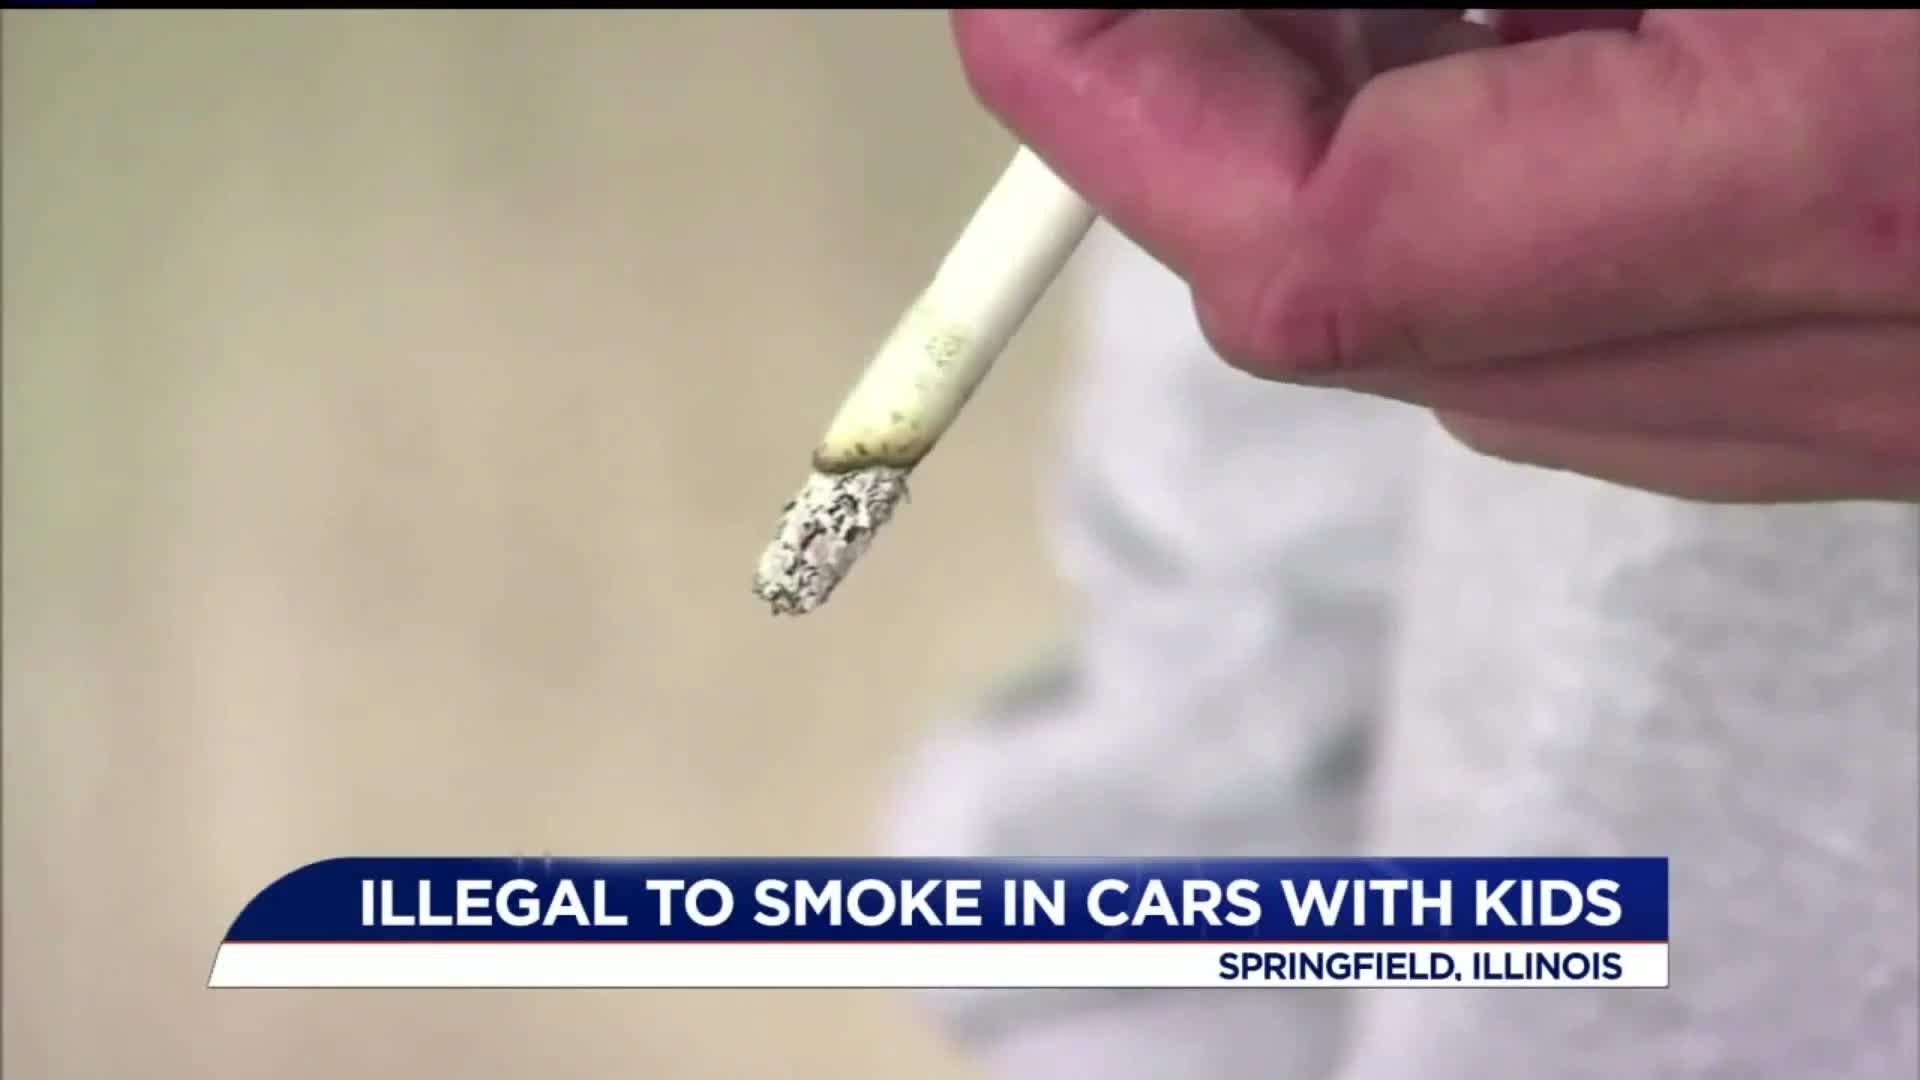 In Illinois you can no longer smoke in the car if a child is present